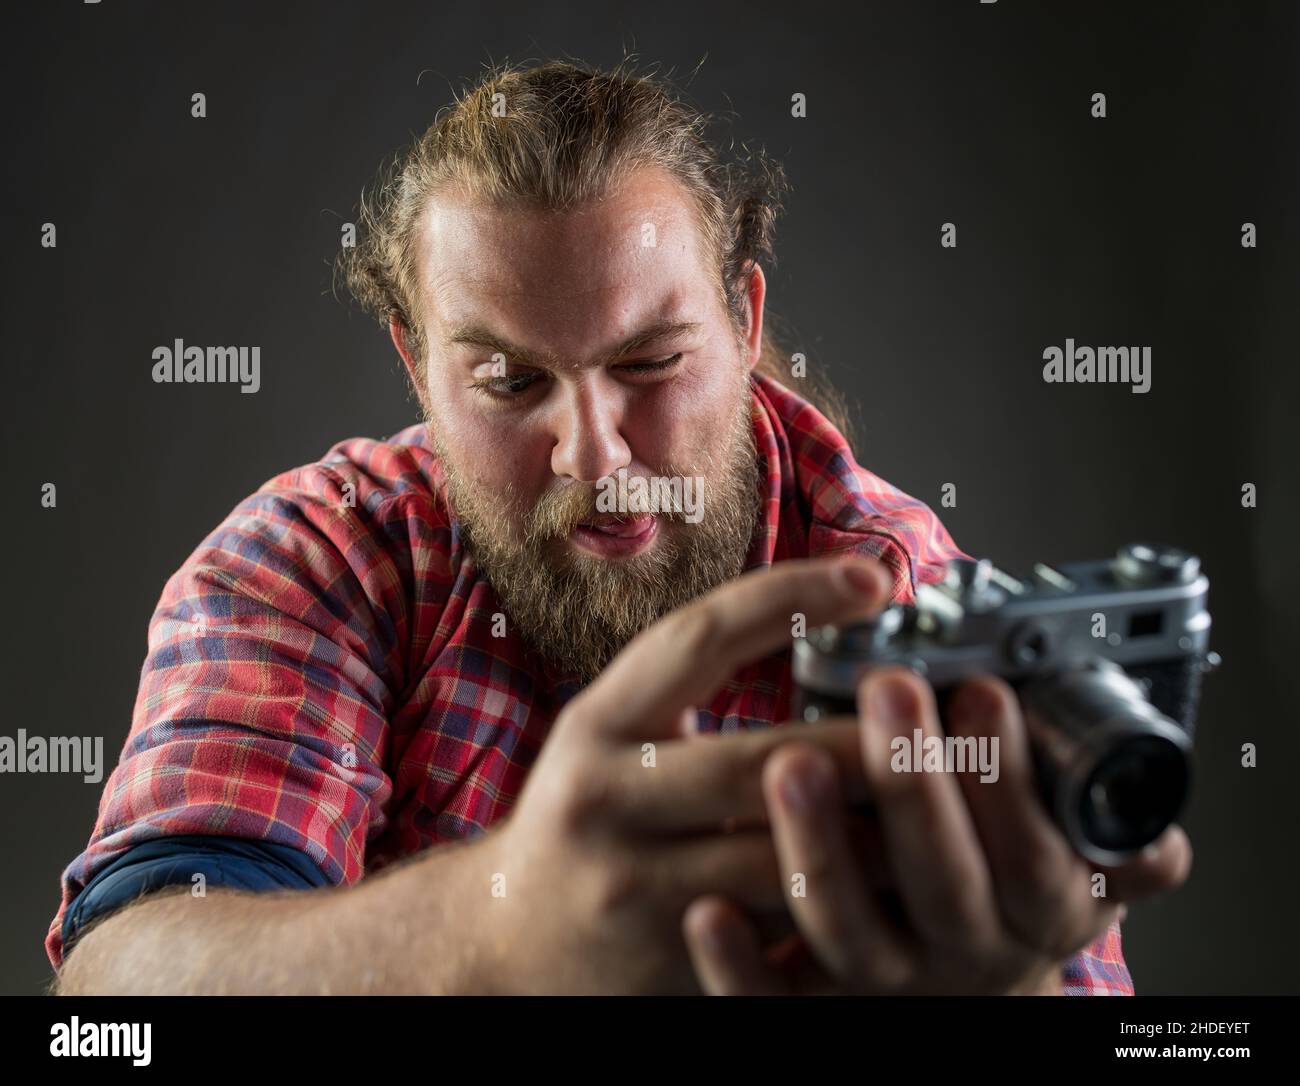 Young bearded man making funny facial expression while taking a photo with old-fashioned camera. Stock Photo